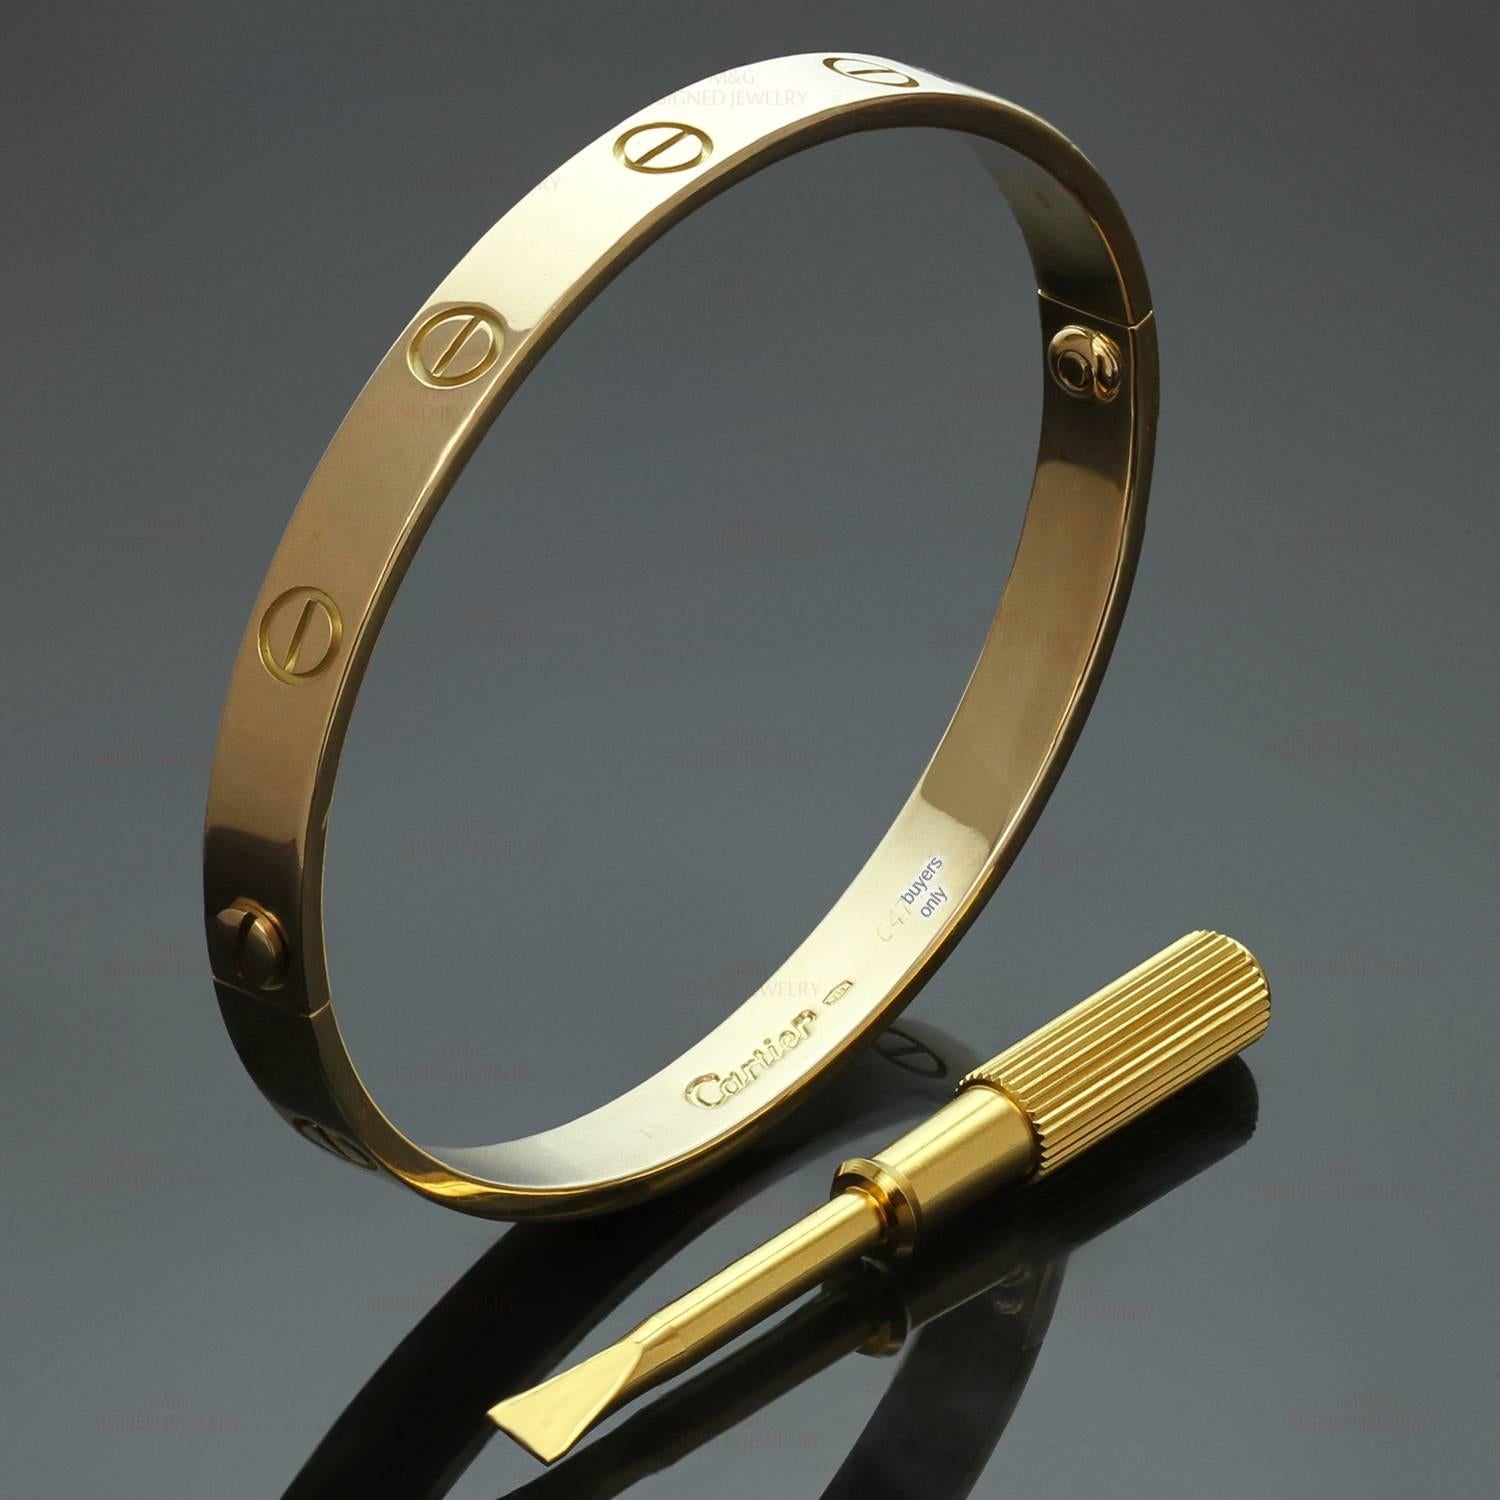 This iconic bracelet from Cartier's Love collection is finely crafted in 18k yellow gold and completed with the original Cartier screwdriver. This bangle is a size 18. Made in France circa 2000s. Measurements: 0.23" (6mm) width. 